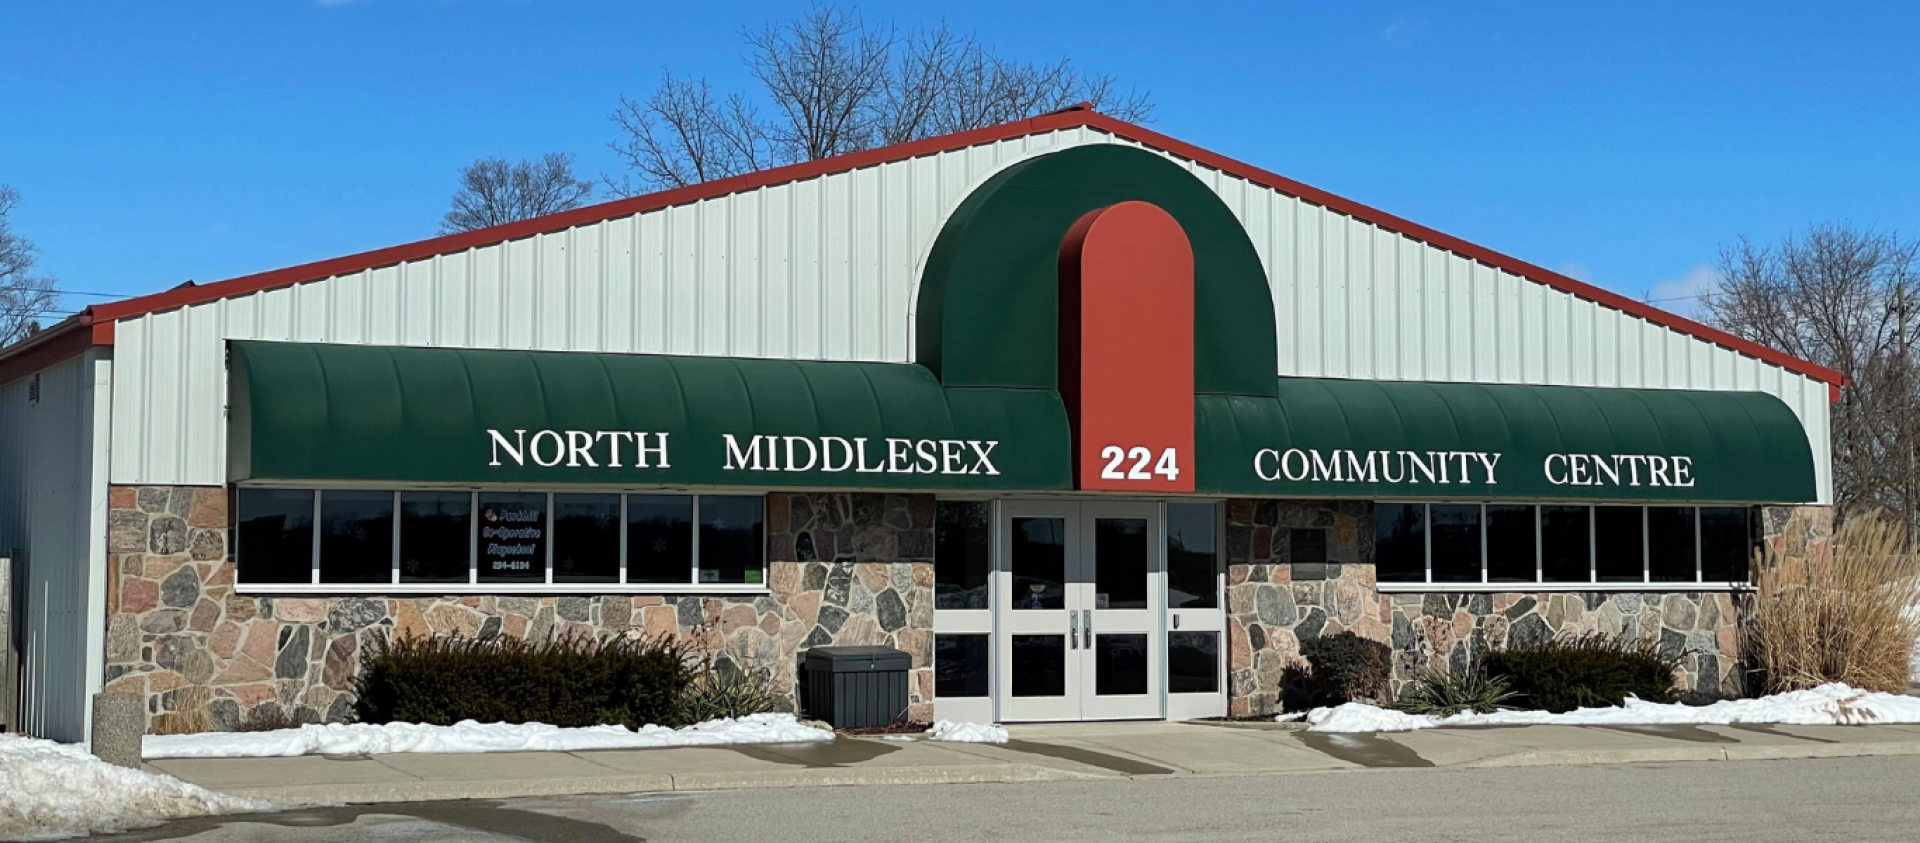 North Middlesex Community Centre